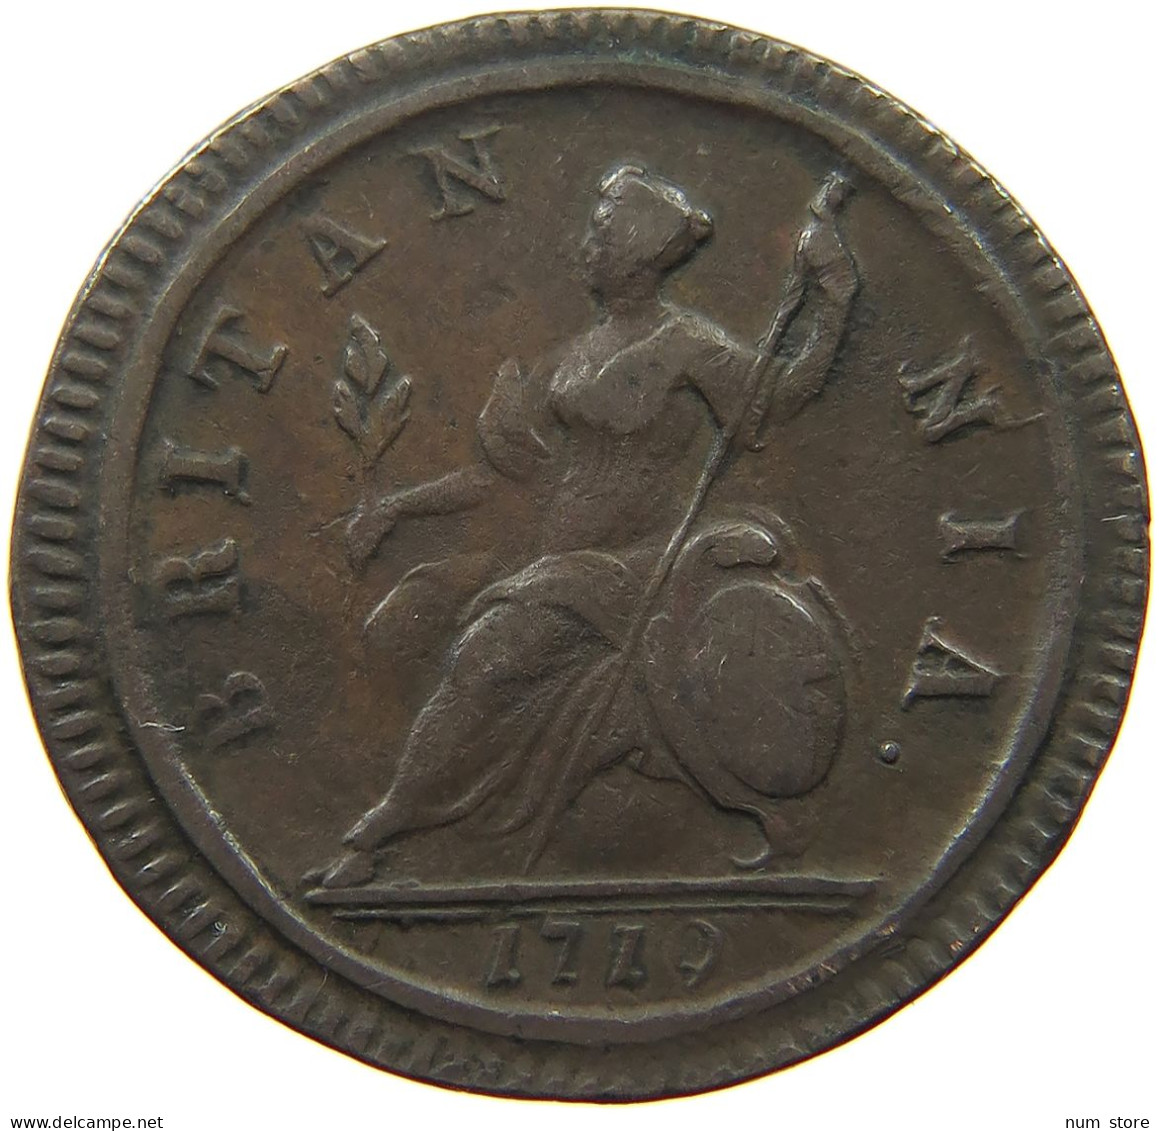 GREAT BRITAIN HALFPENNY 1719 George I. (1714-1727) #t149 0093 - B. 1/2 Penny